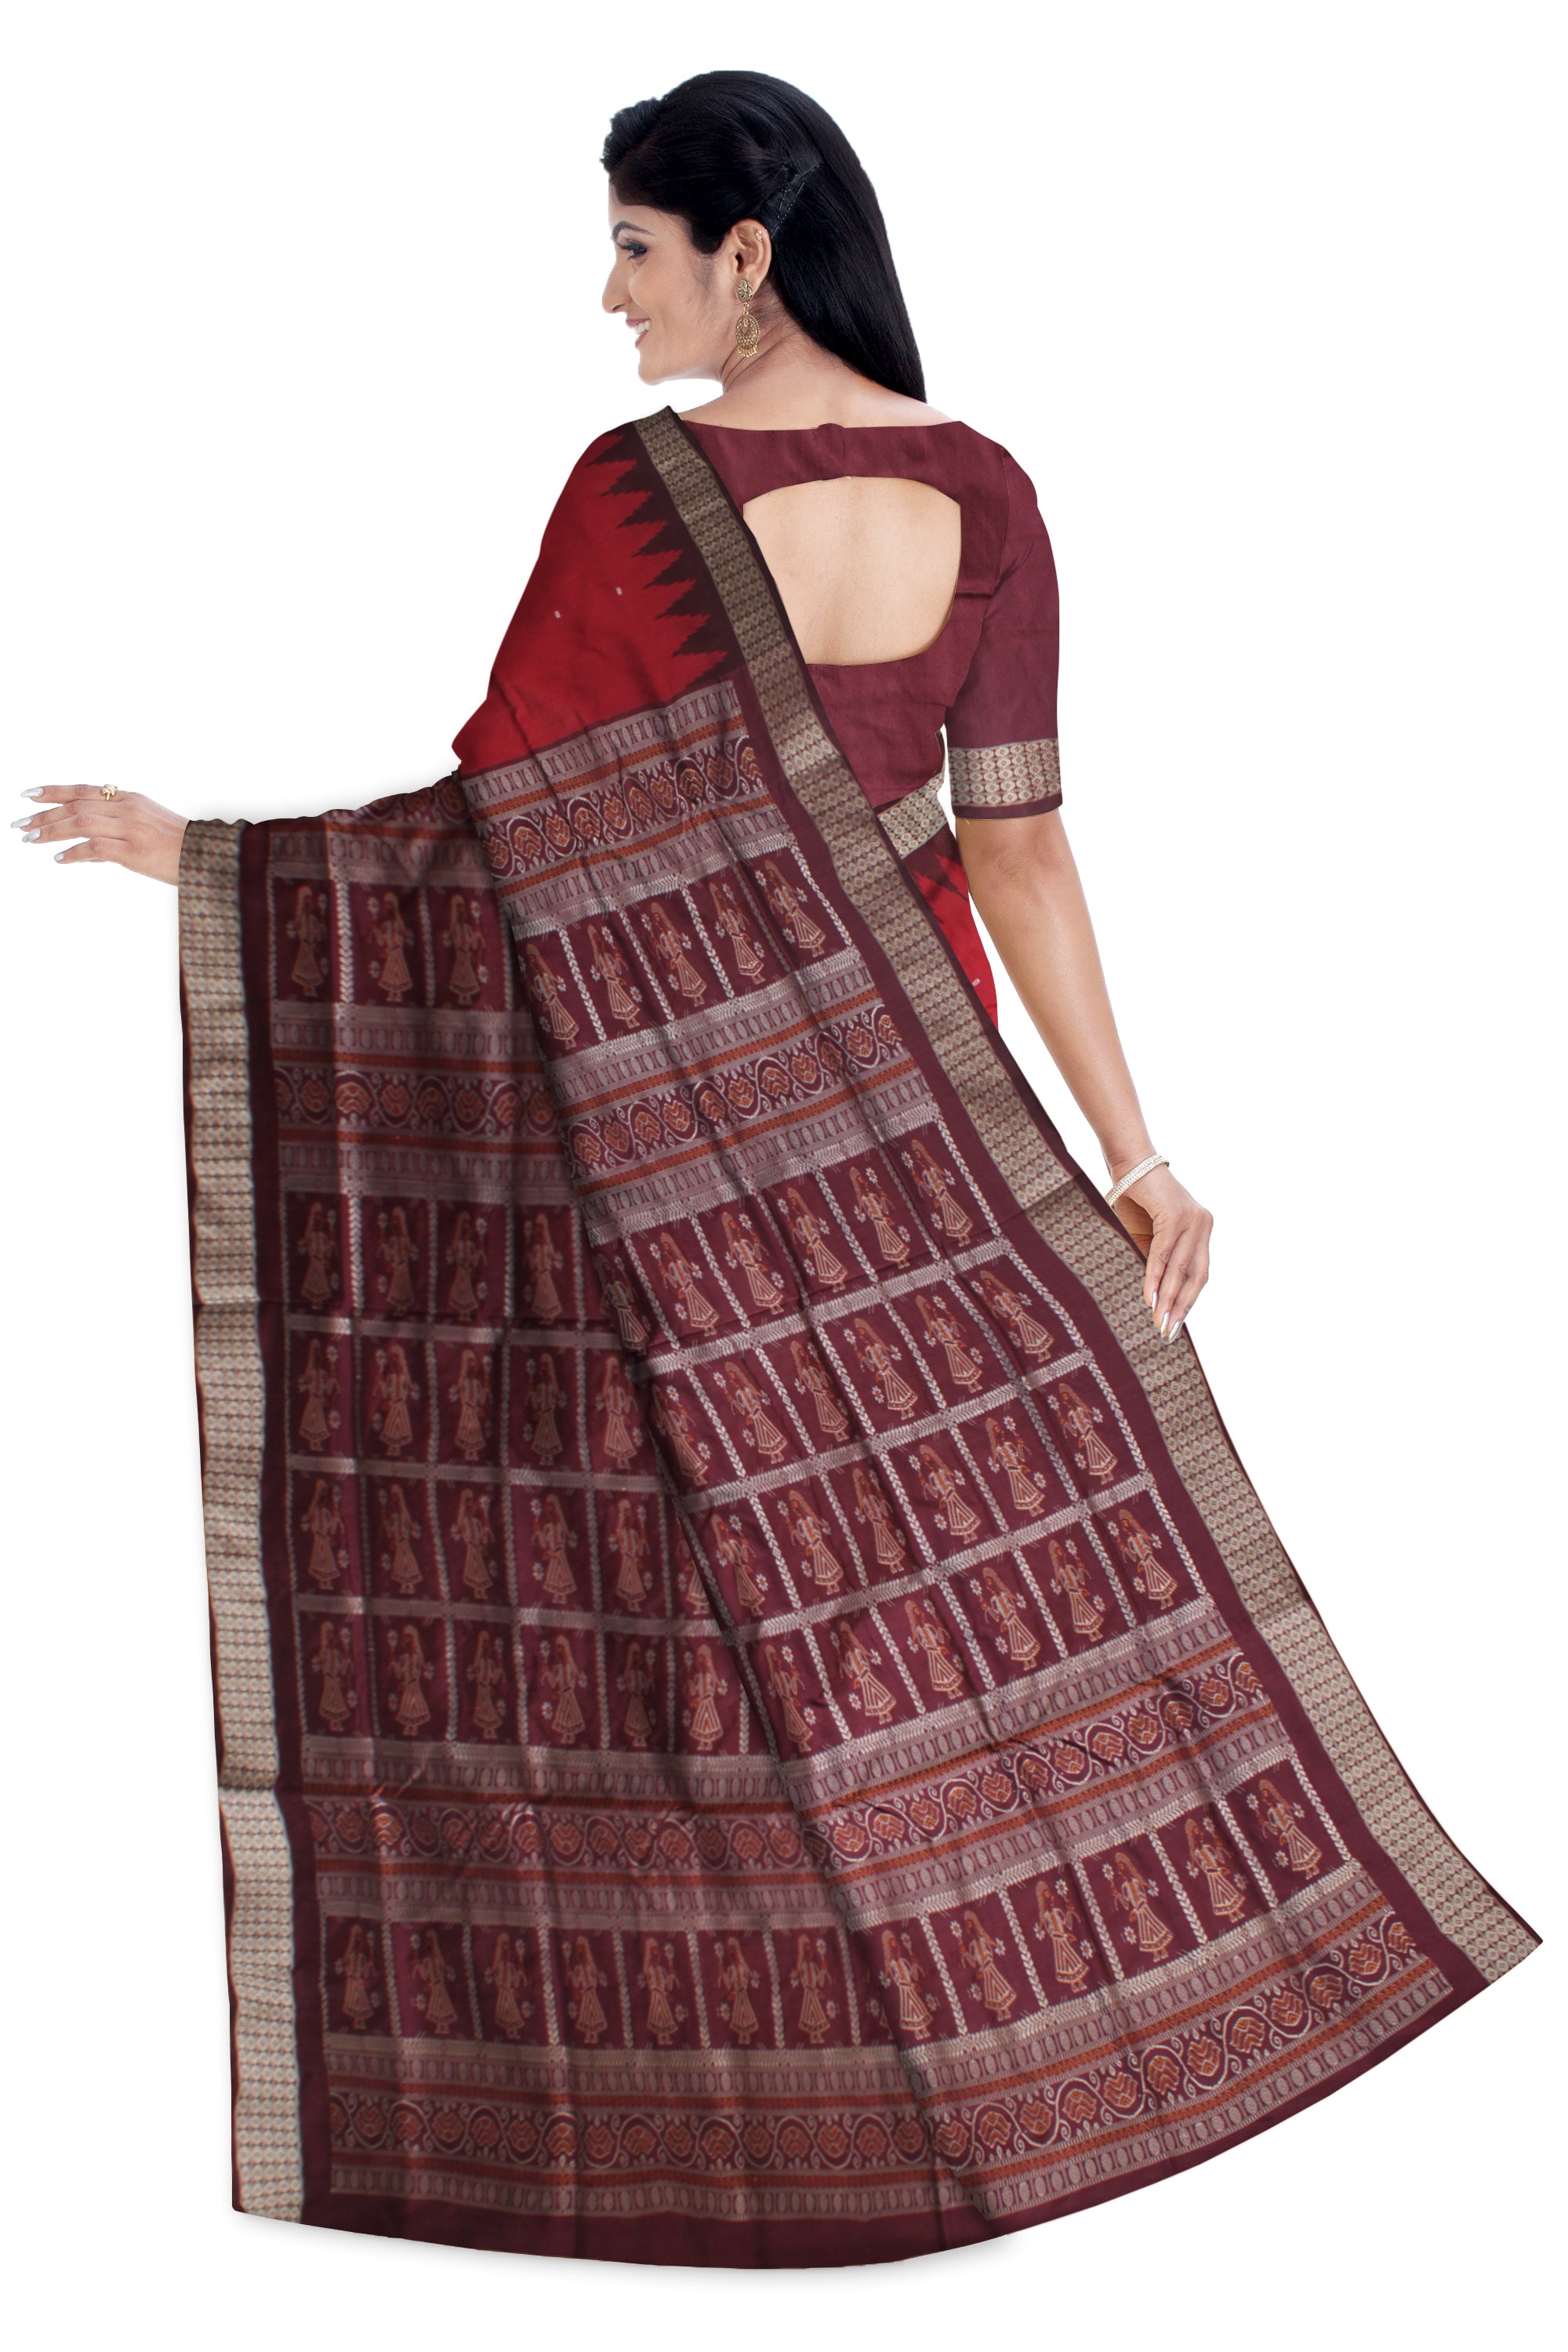 PALLU DOLL PRINT AND BODY SMALL BOOTY PATTERN PATA SAREE IS MAROON AND COFFEE COLOR BASE,WITH BLOUSE PIECE. - Koshali Arts & Crafts Enterprise